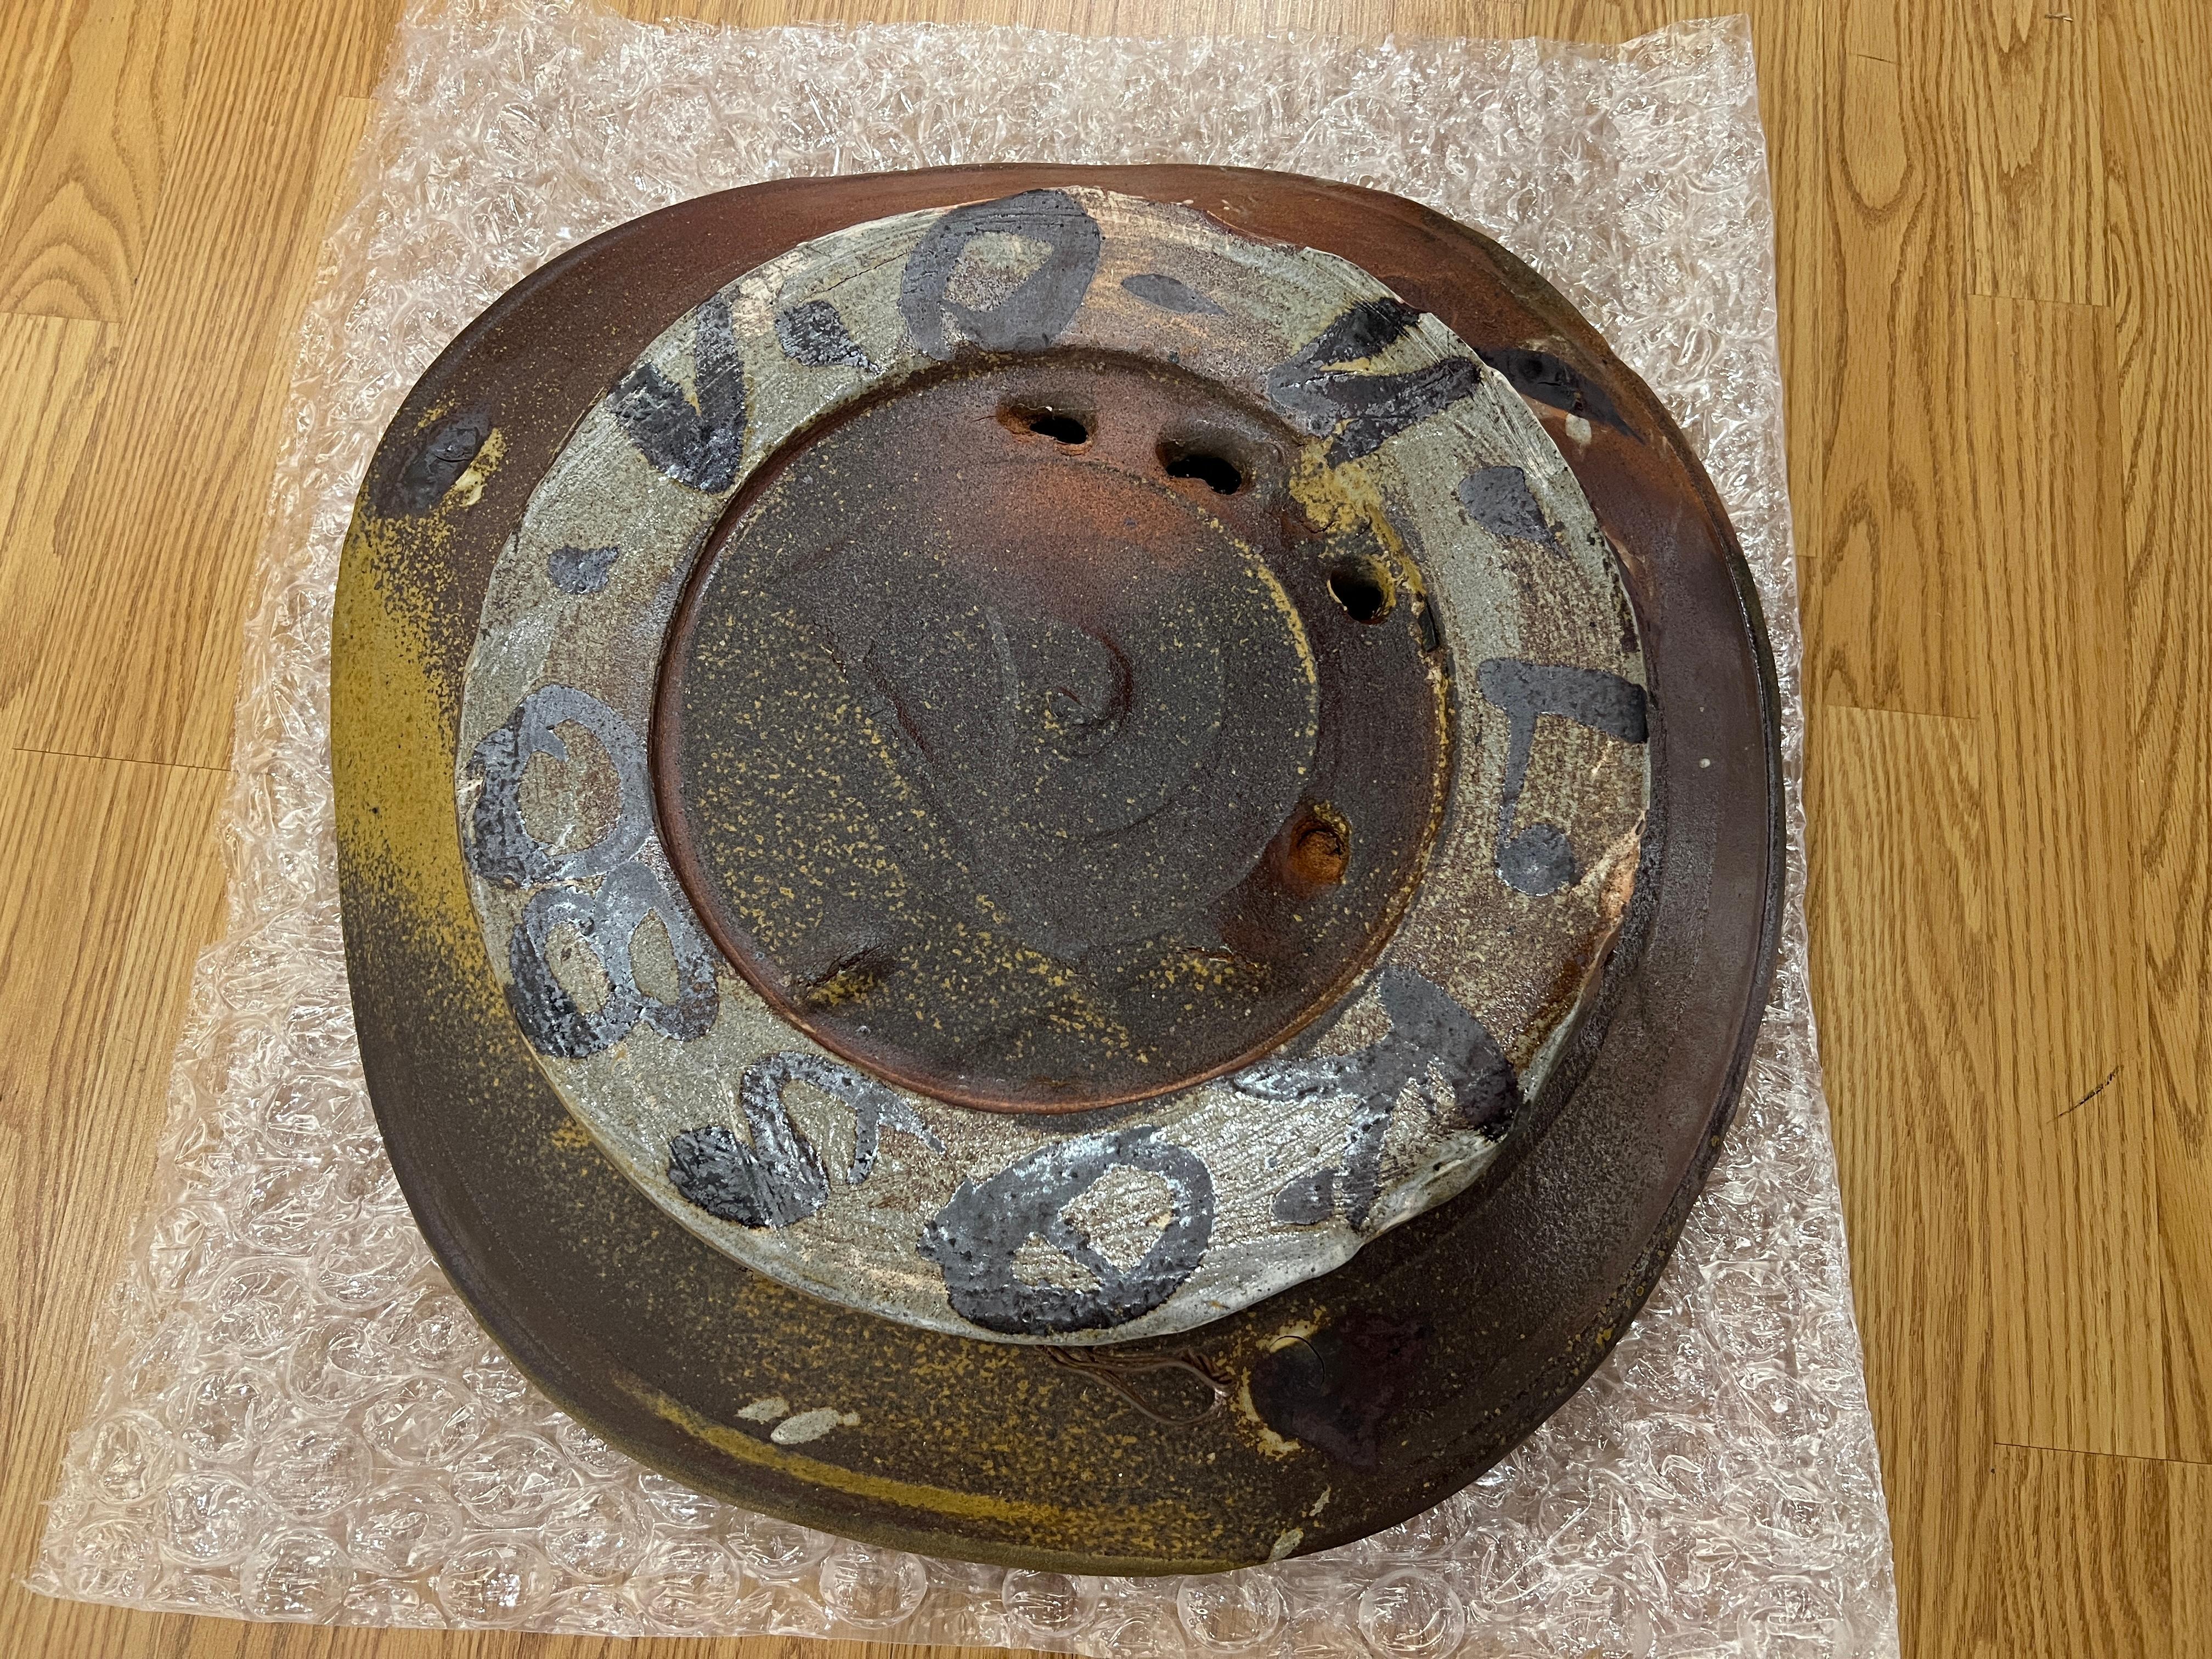 Claycharger, 1980
By Peter Voulkos (1924-2002)
Diameter: 21